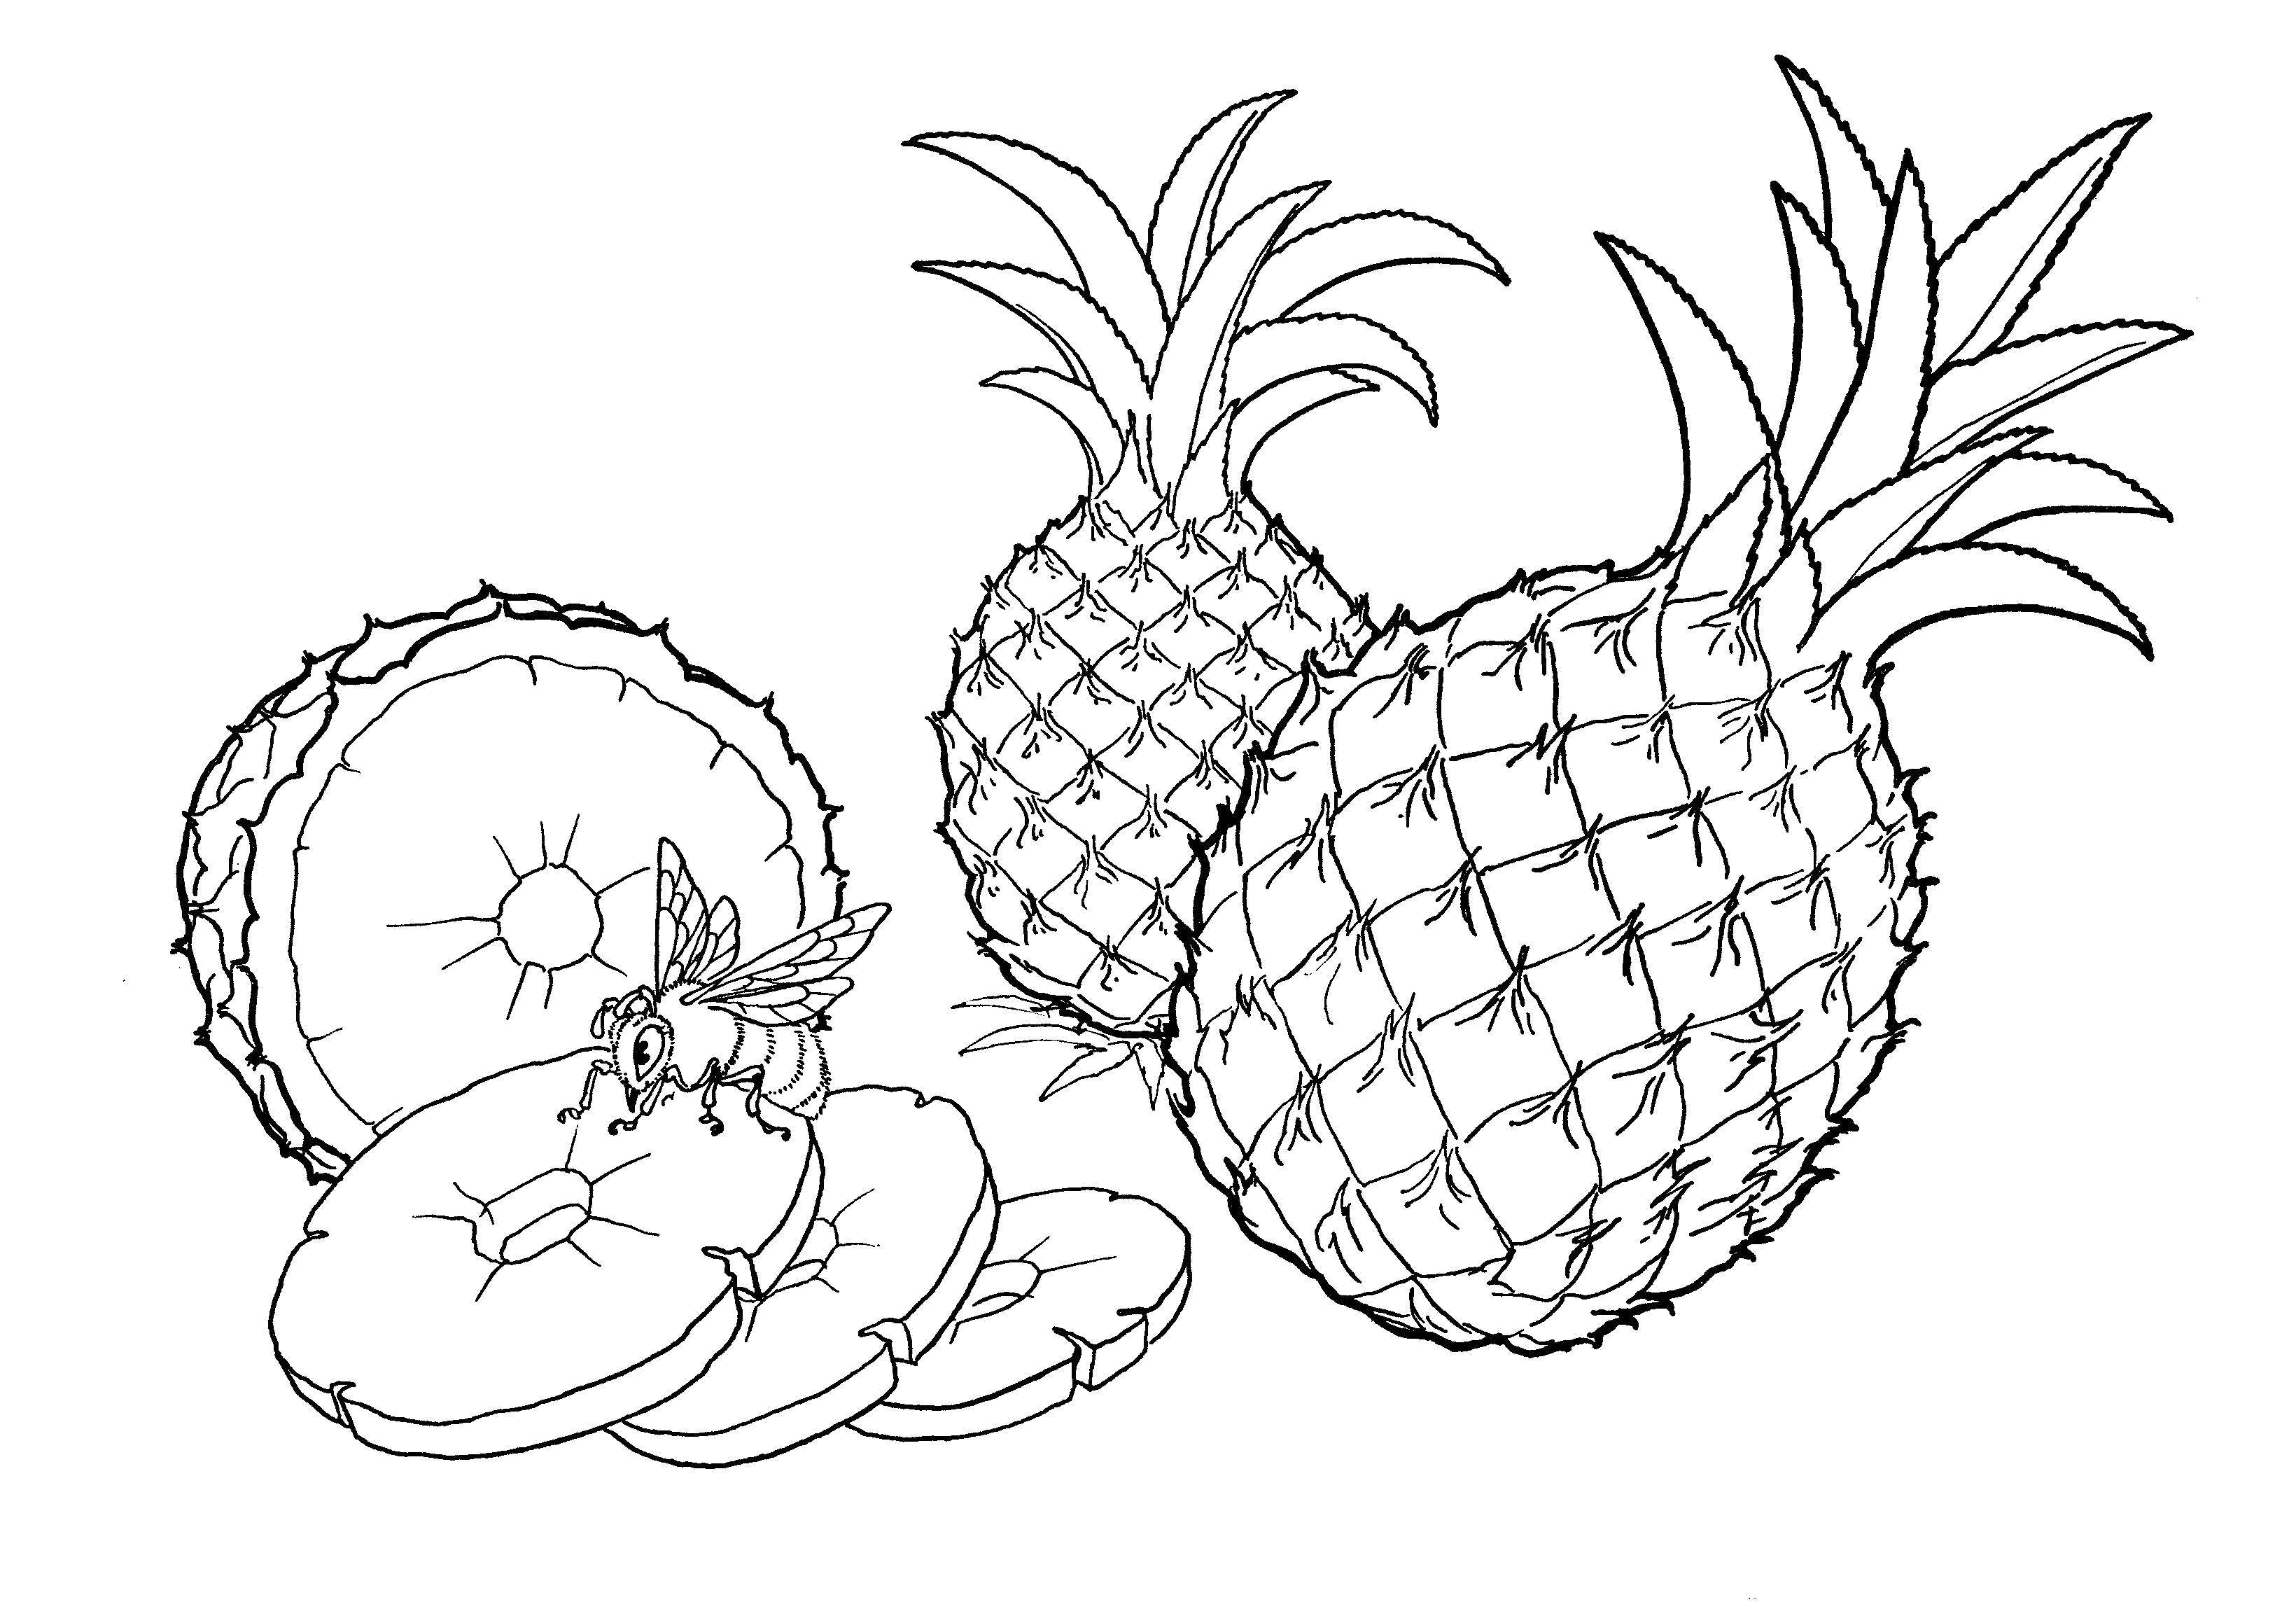 Coloring Sliced pineapple. Category fruits. Tags:  Fruit, pineapple.